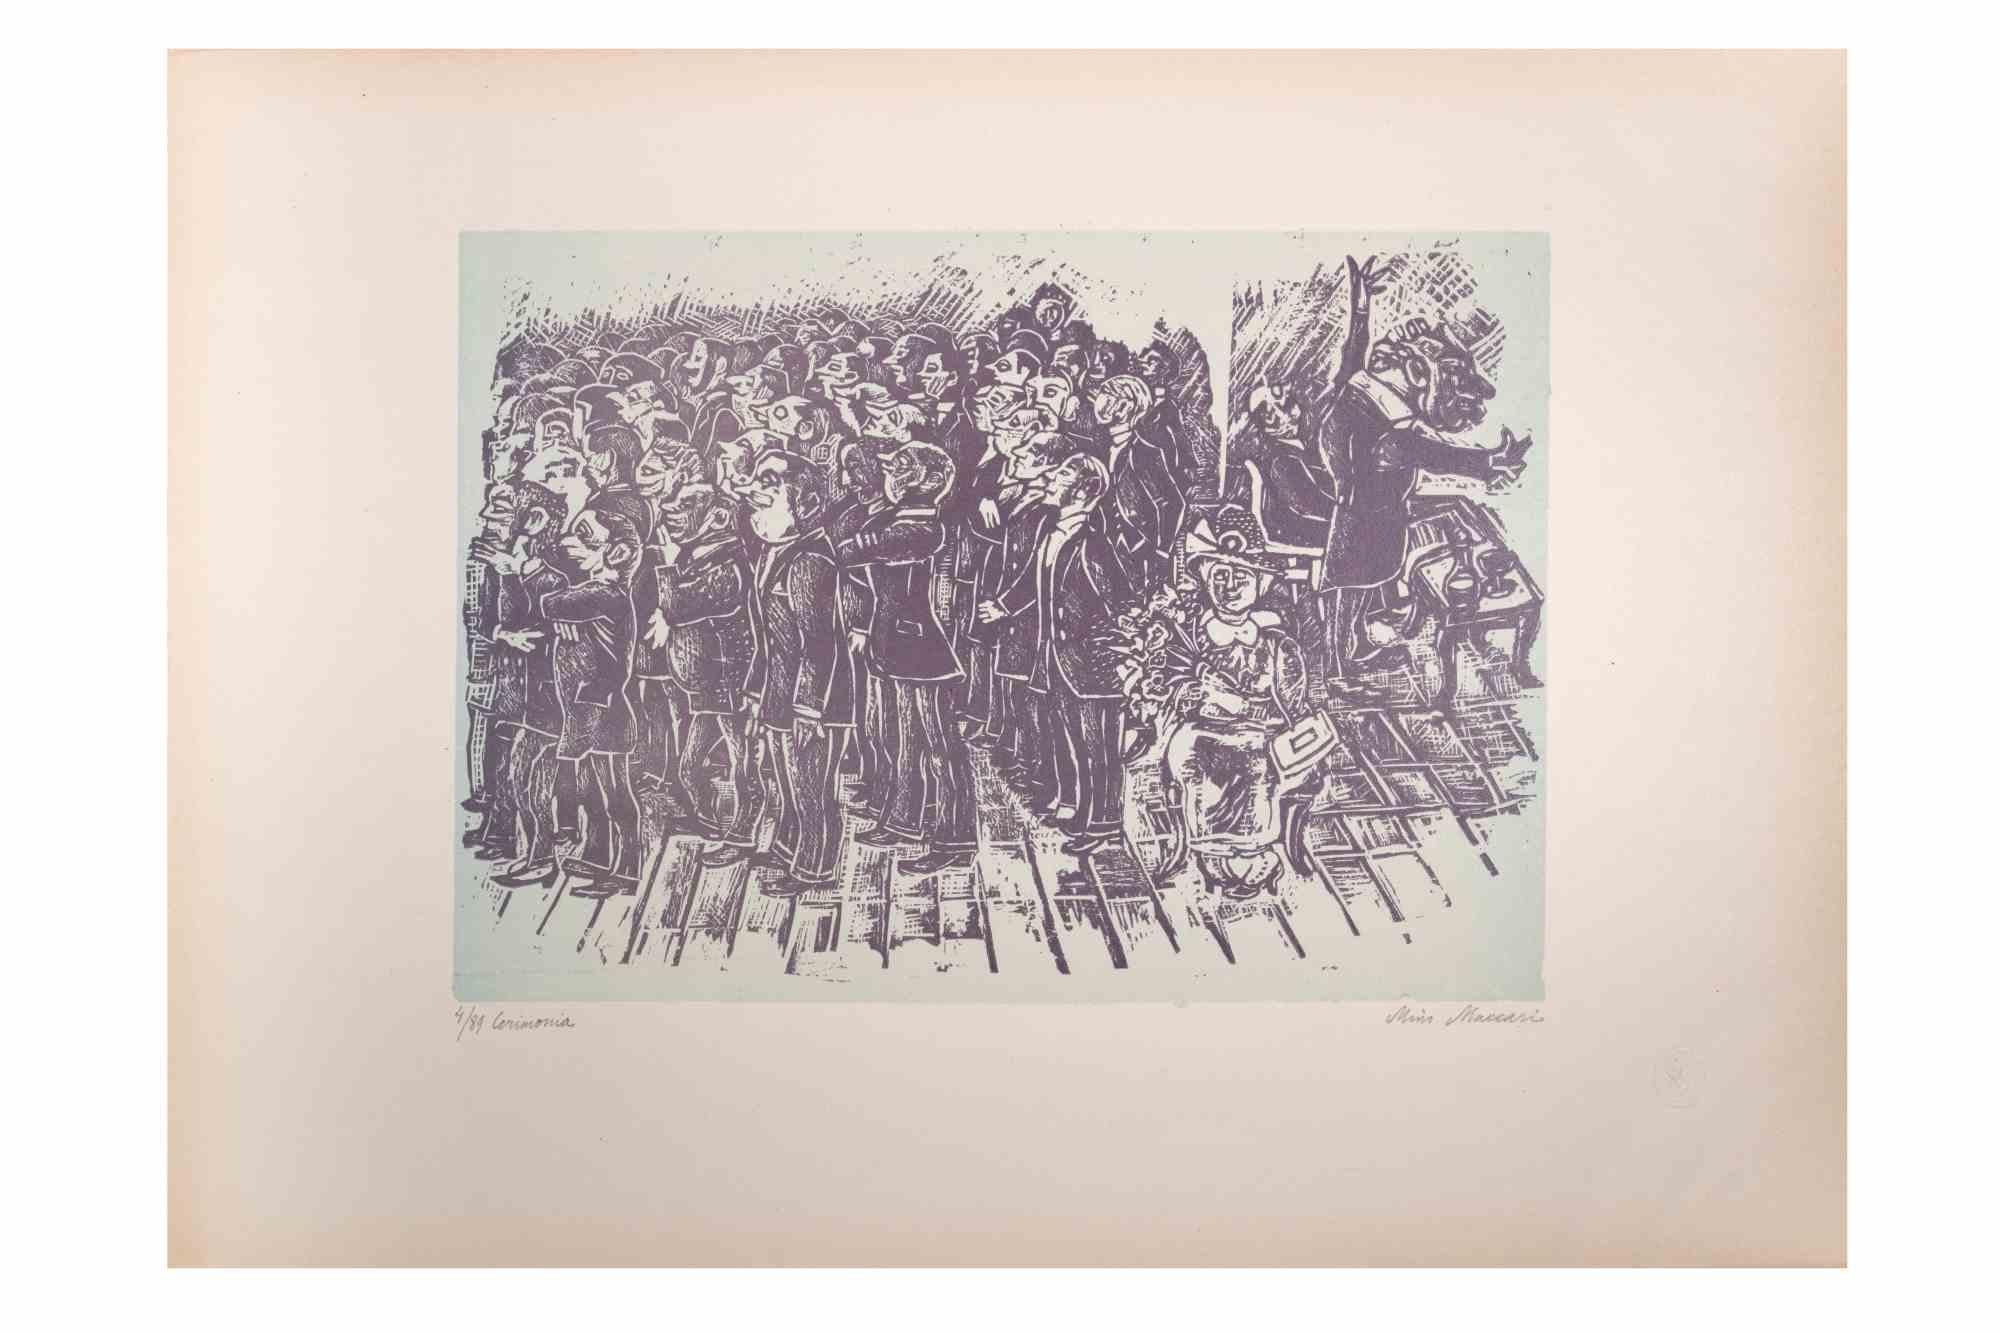 The Ceremony is an Artwork realized by Mino Maccari  (1924-1989) in the Mid-20th Century.

Colored woodcut on paper. Hand-signed on the lower, numbered 4/89 specimens and titled on the left margin.

Good conditions.

Mino Maccari (Siena, 1924-Rome,